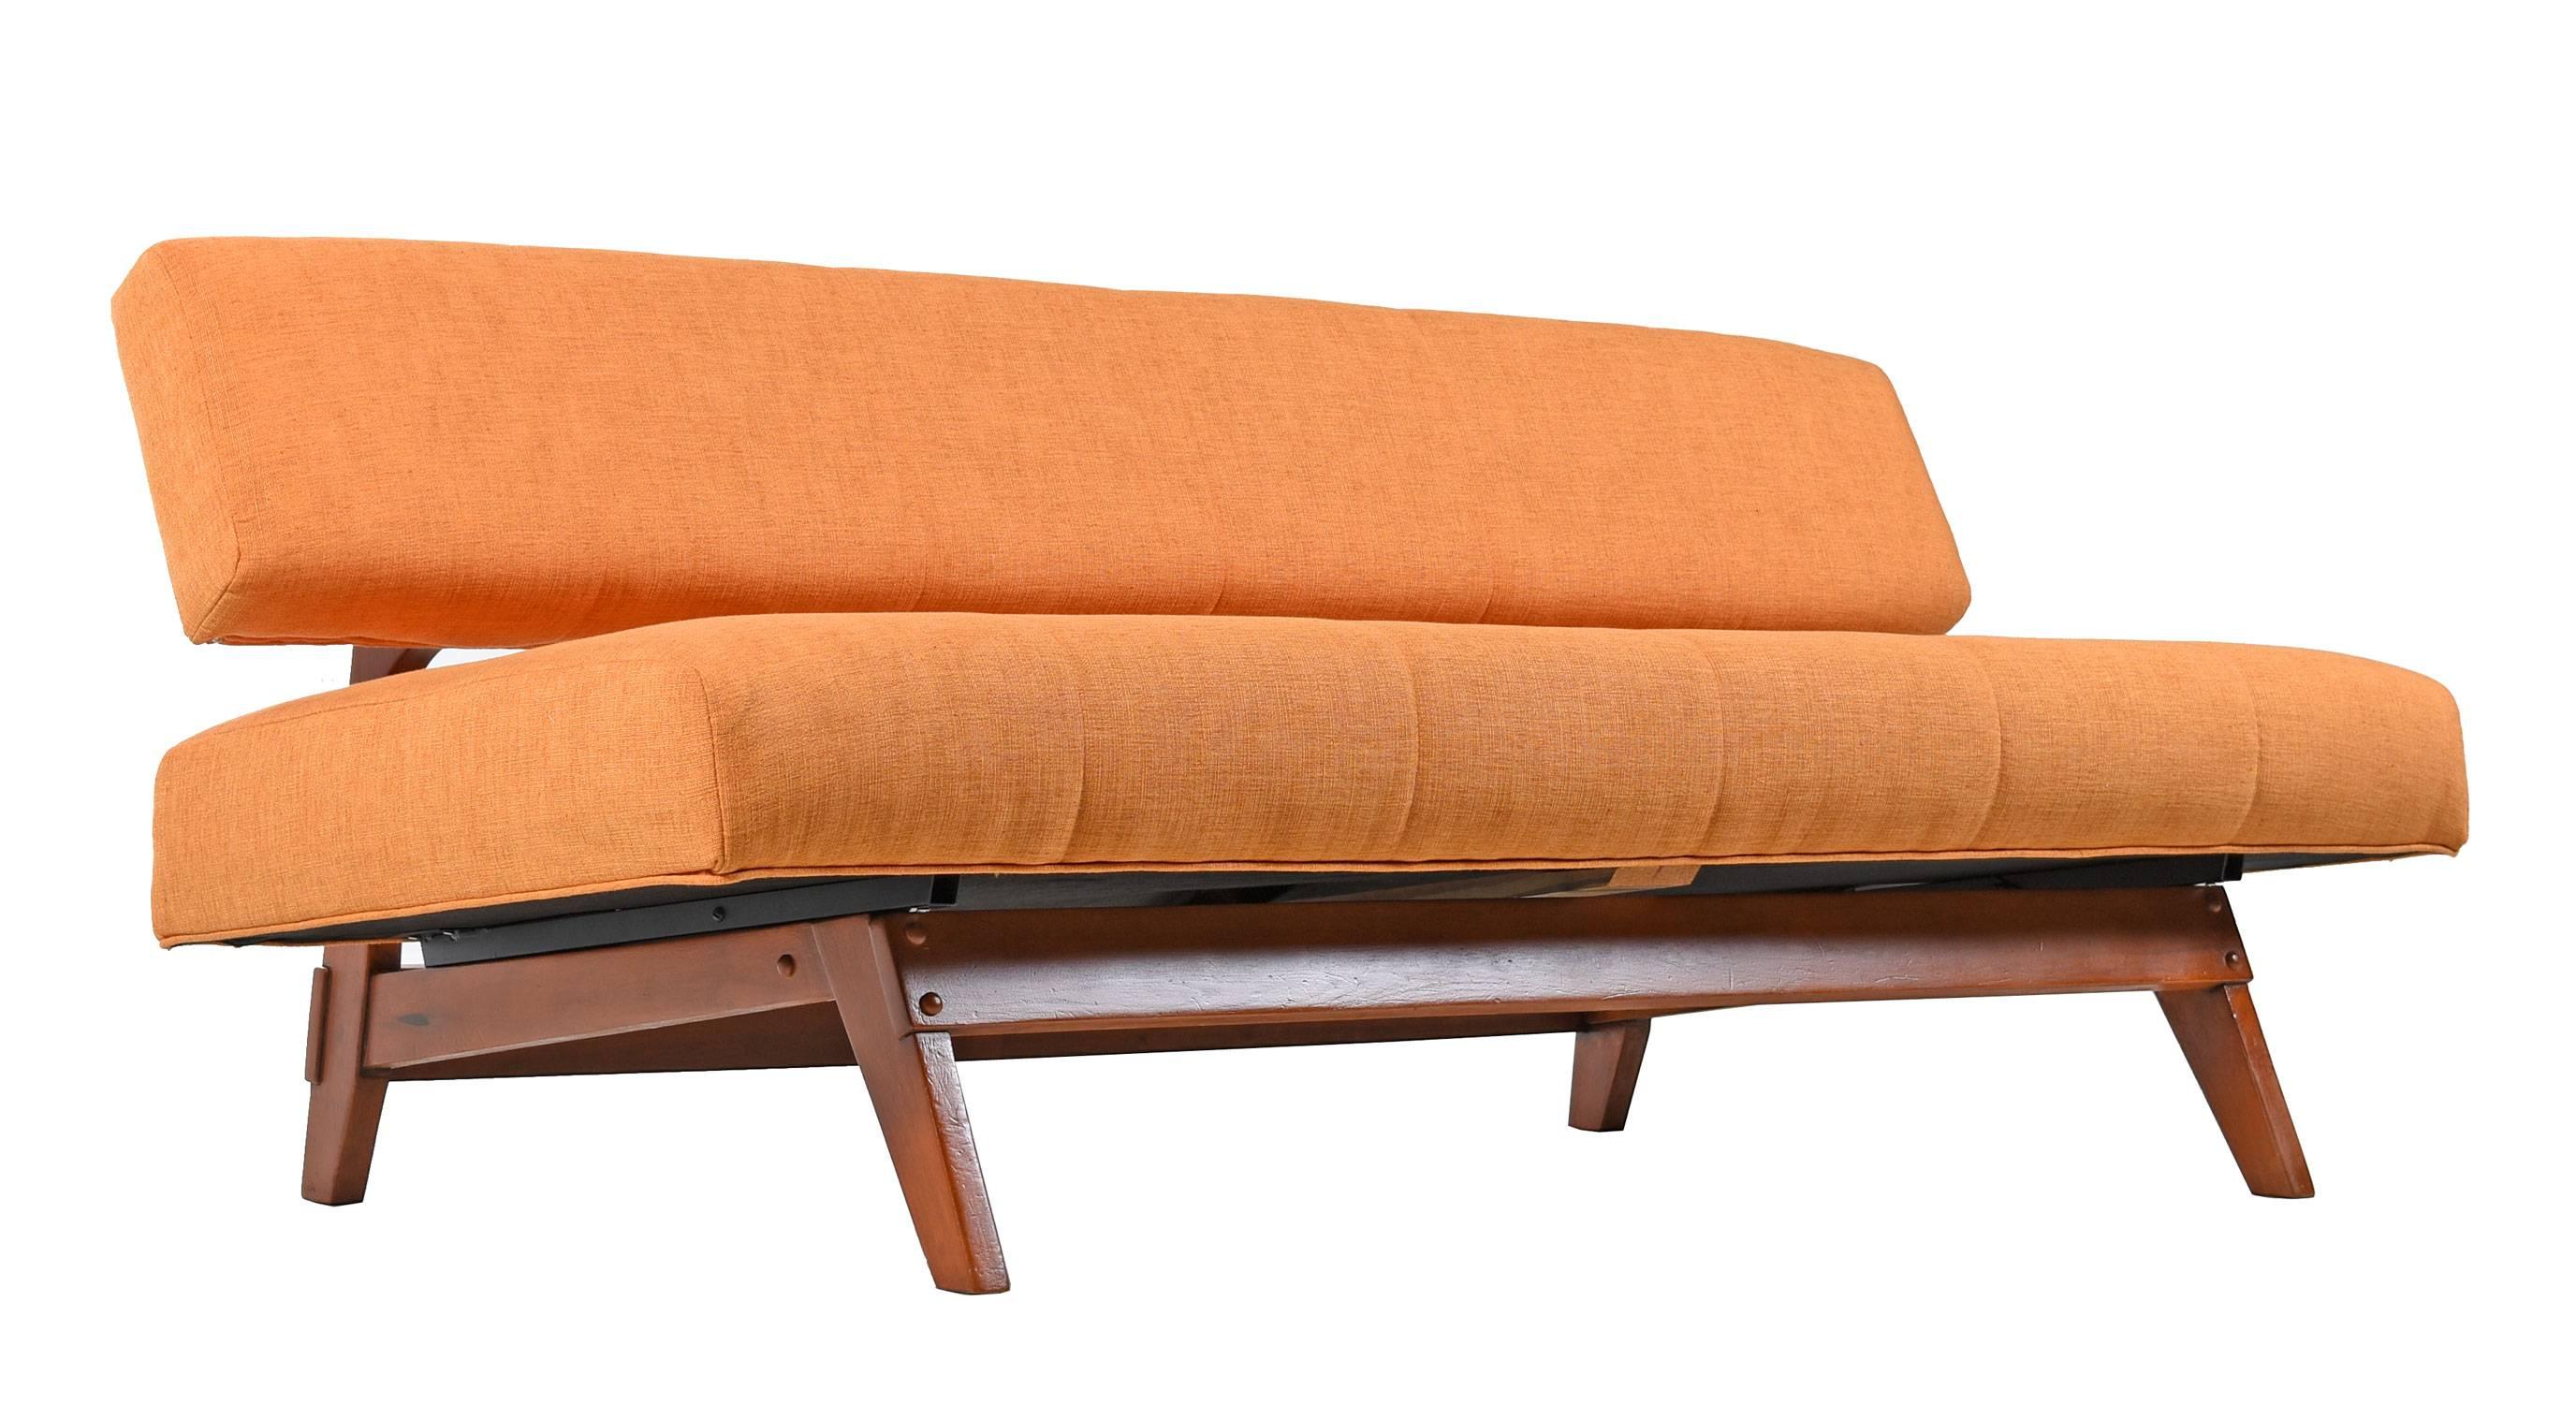 Restored Mid-Century Modern daybed sofa, vintage 1950s. This authentic retro sofa has been completely restored with new foam, and new internal wood backrest beneath the new tangerine colored upholstery. The sofa is convertible. Lift the bottom level